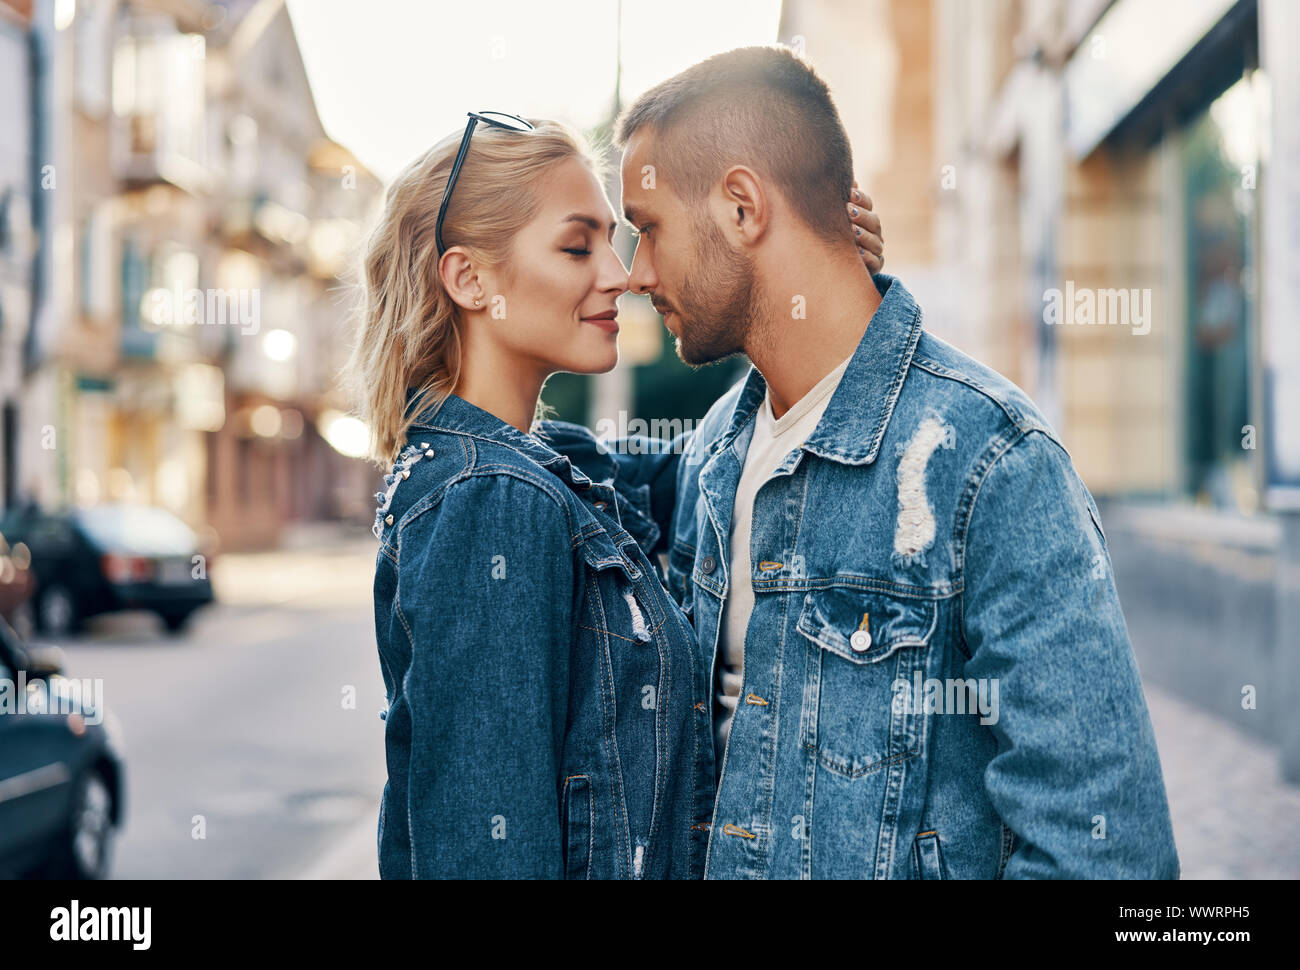 Young loving couple kissing and enjoying the company of each other outdoors. Love, passion, dating concept Stock Photo